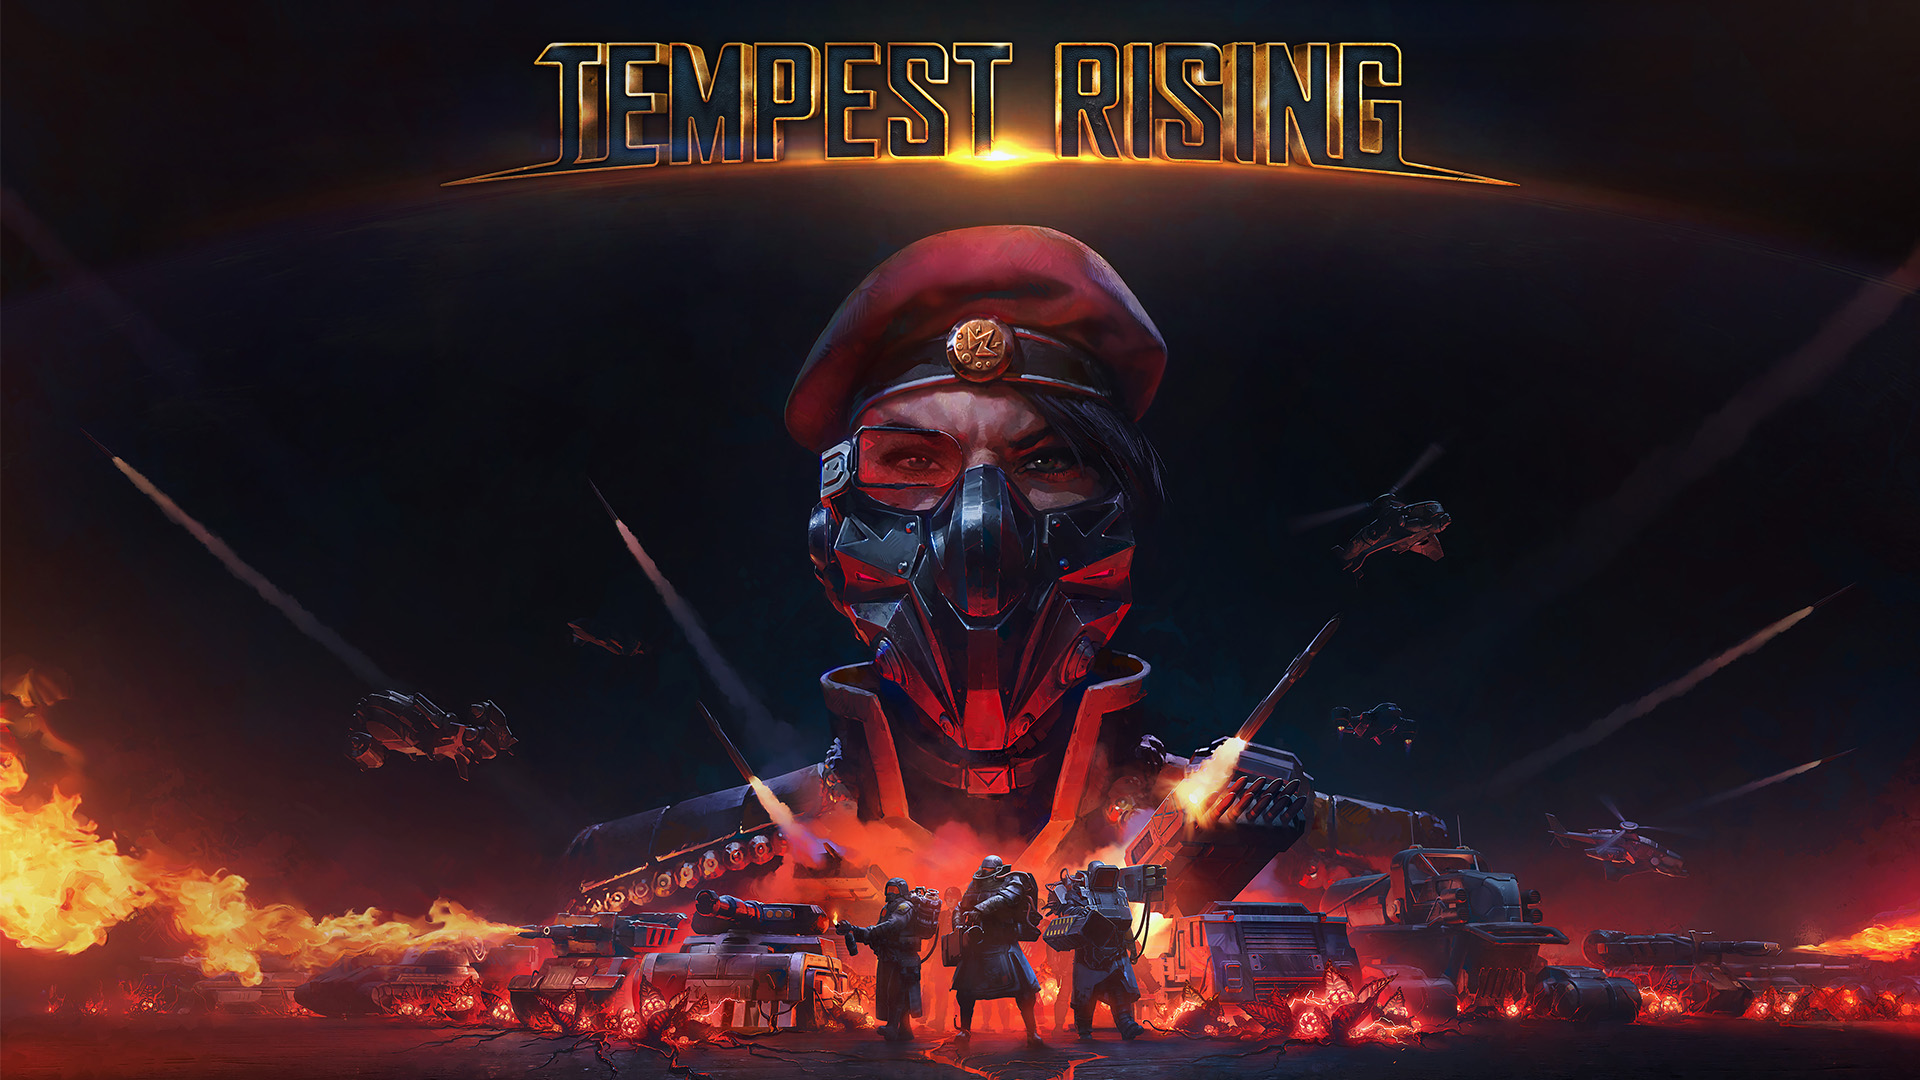 Announcing Tempest Rising - our new RTS game!